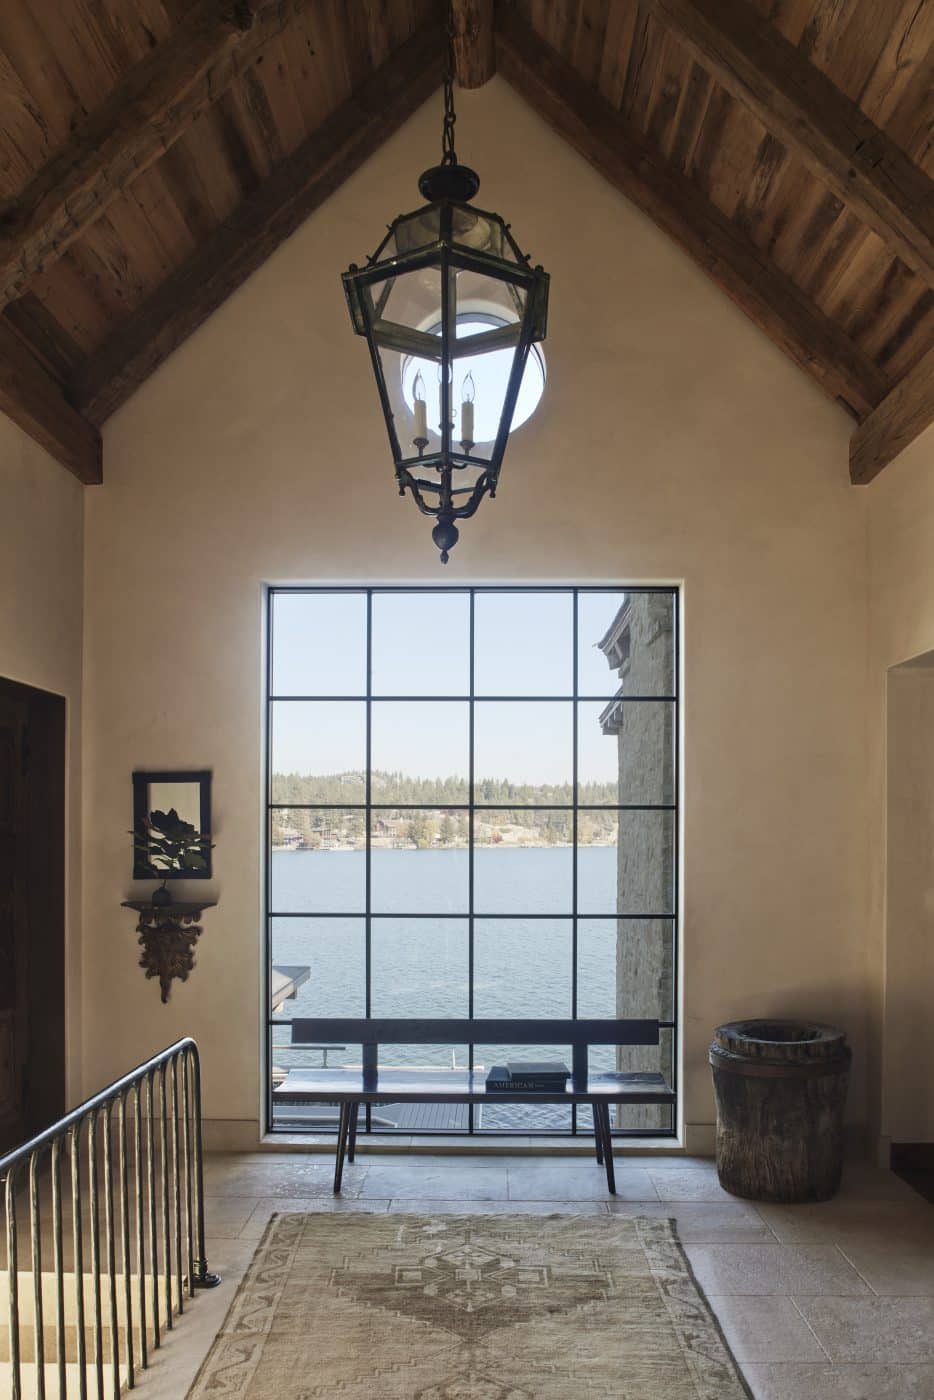 The entryway has a sweeping view of Flathead Lake.